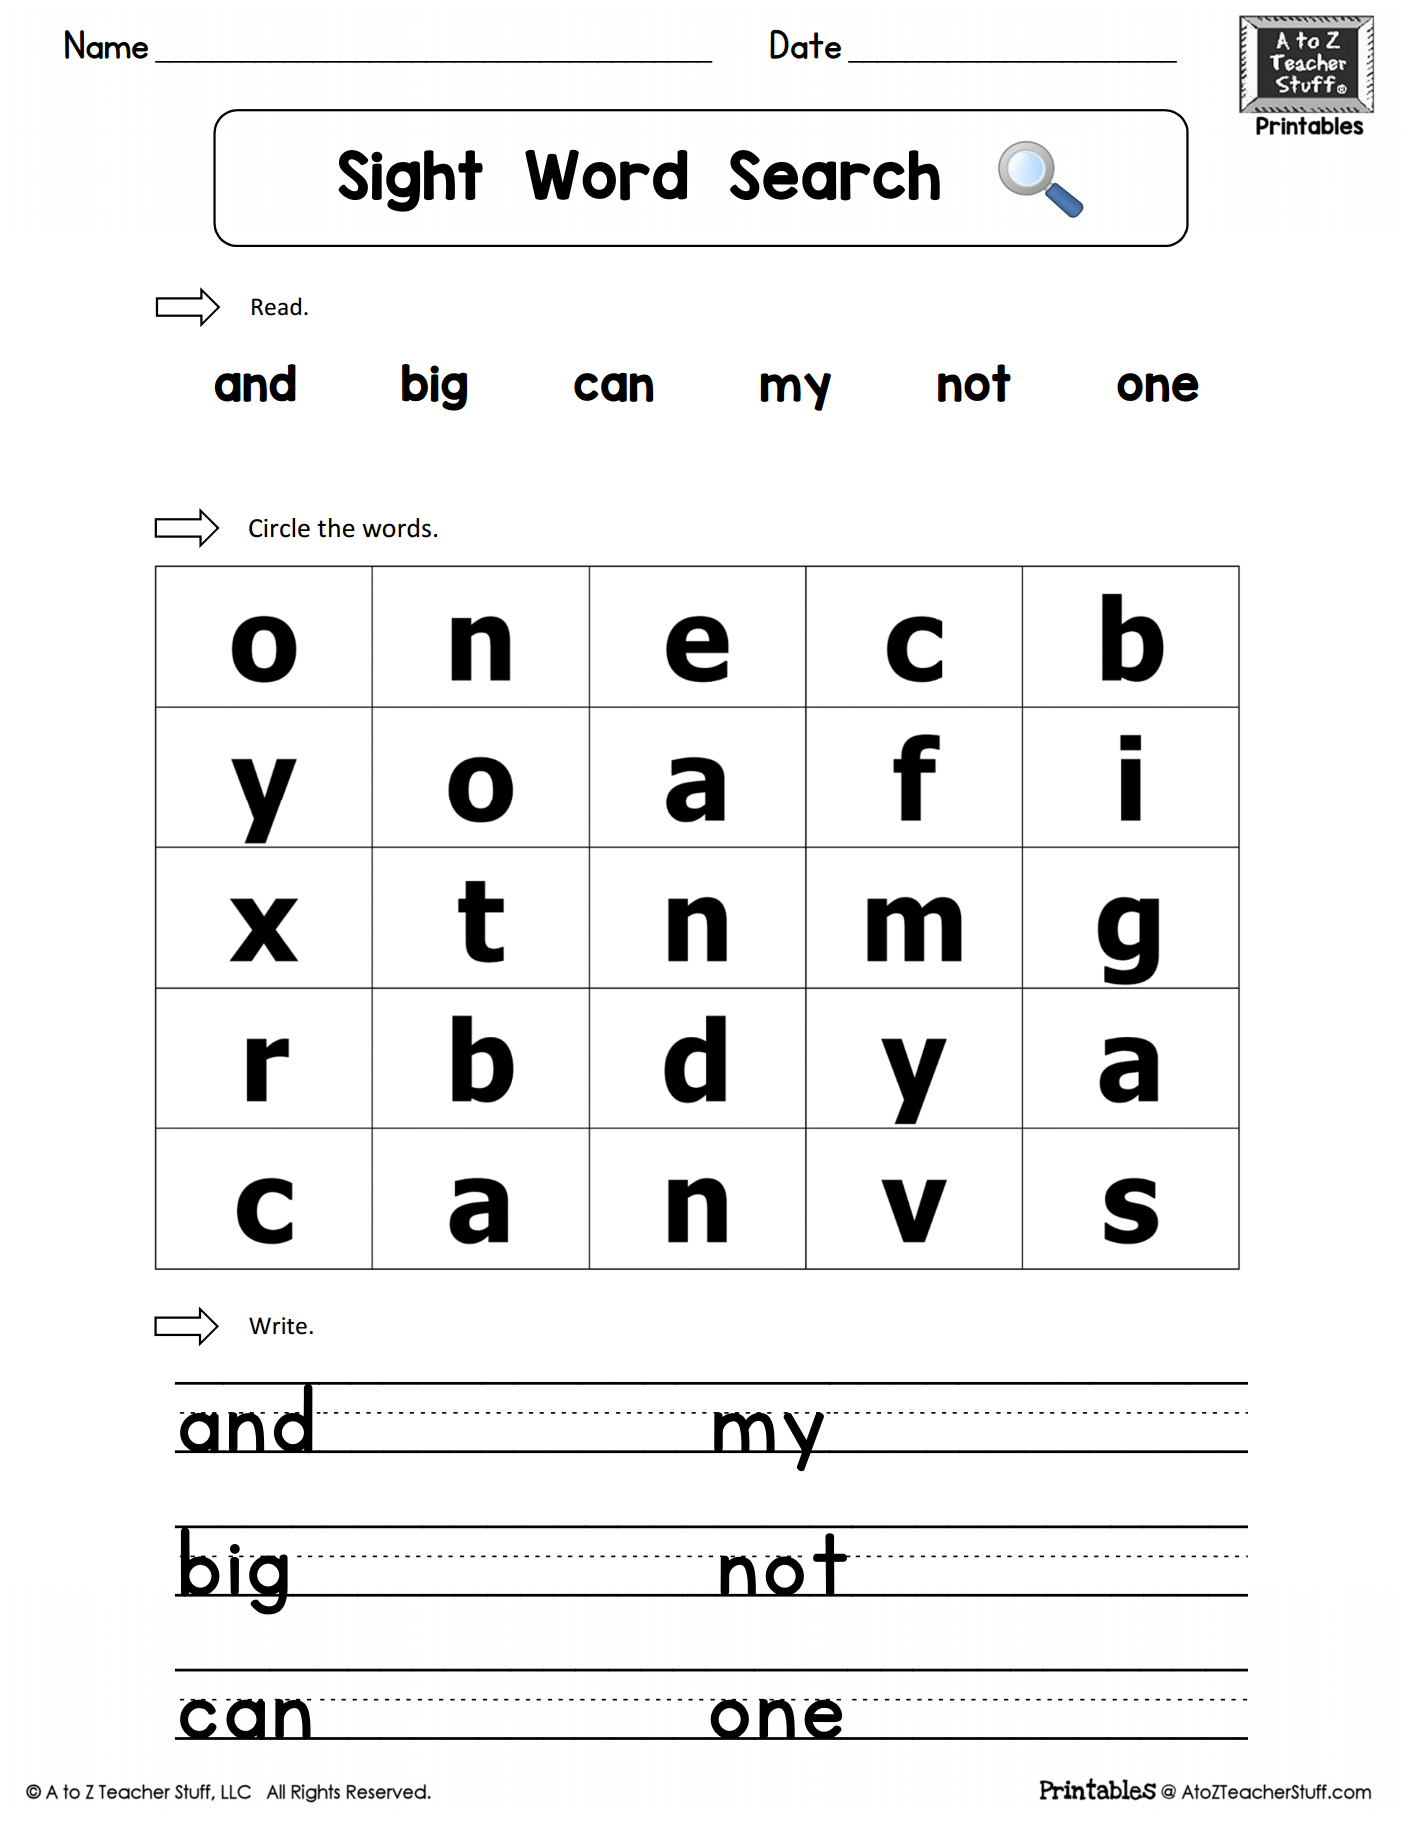 A To Z Teacher Stuff Printable Pages And Worksheets With A To Z Teacher Stuff Tools Printable Handwriting Worksheet Generator